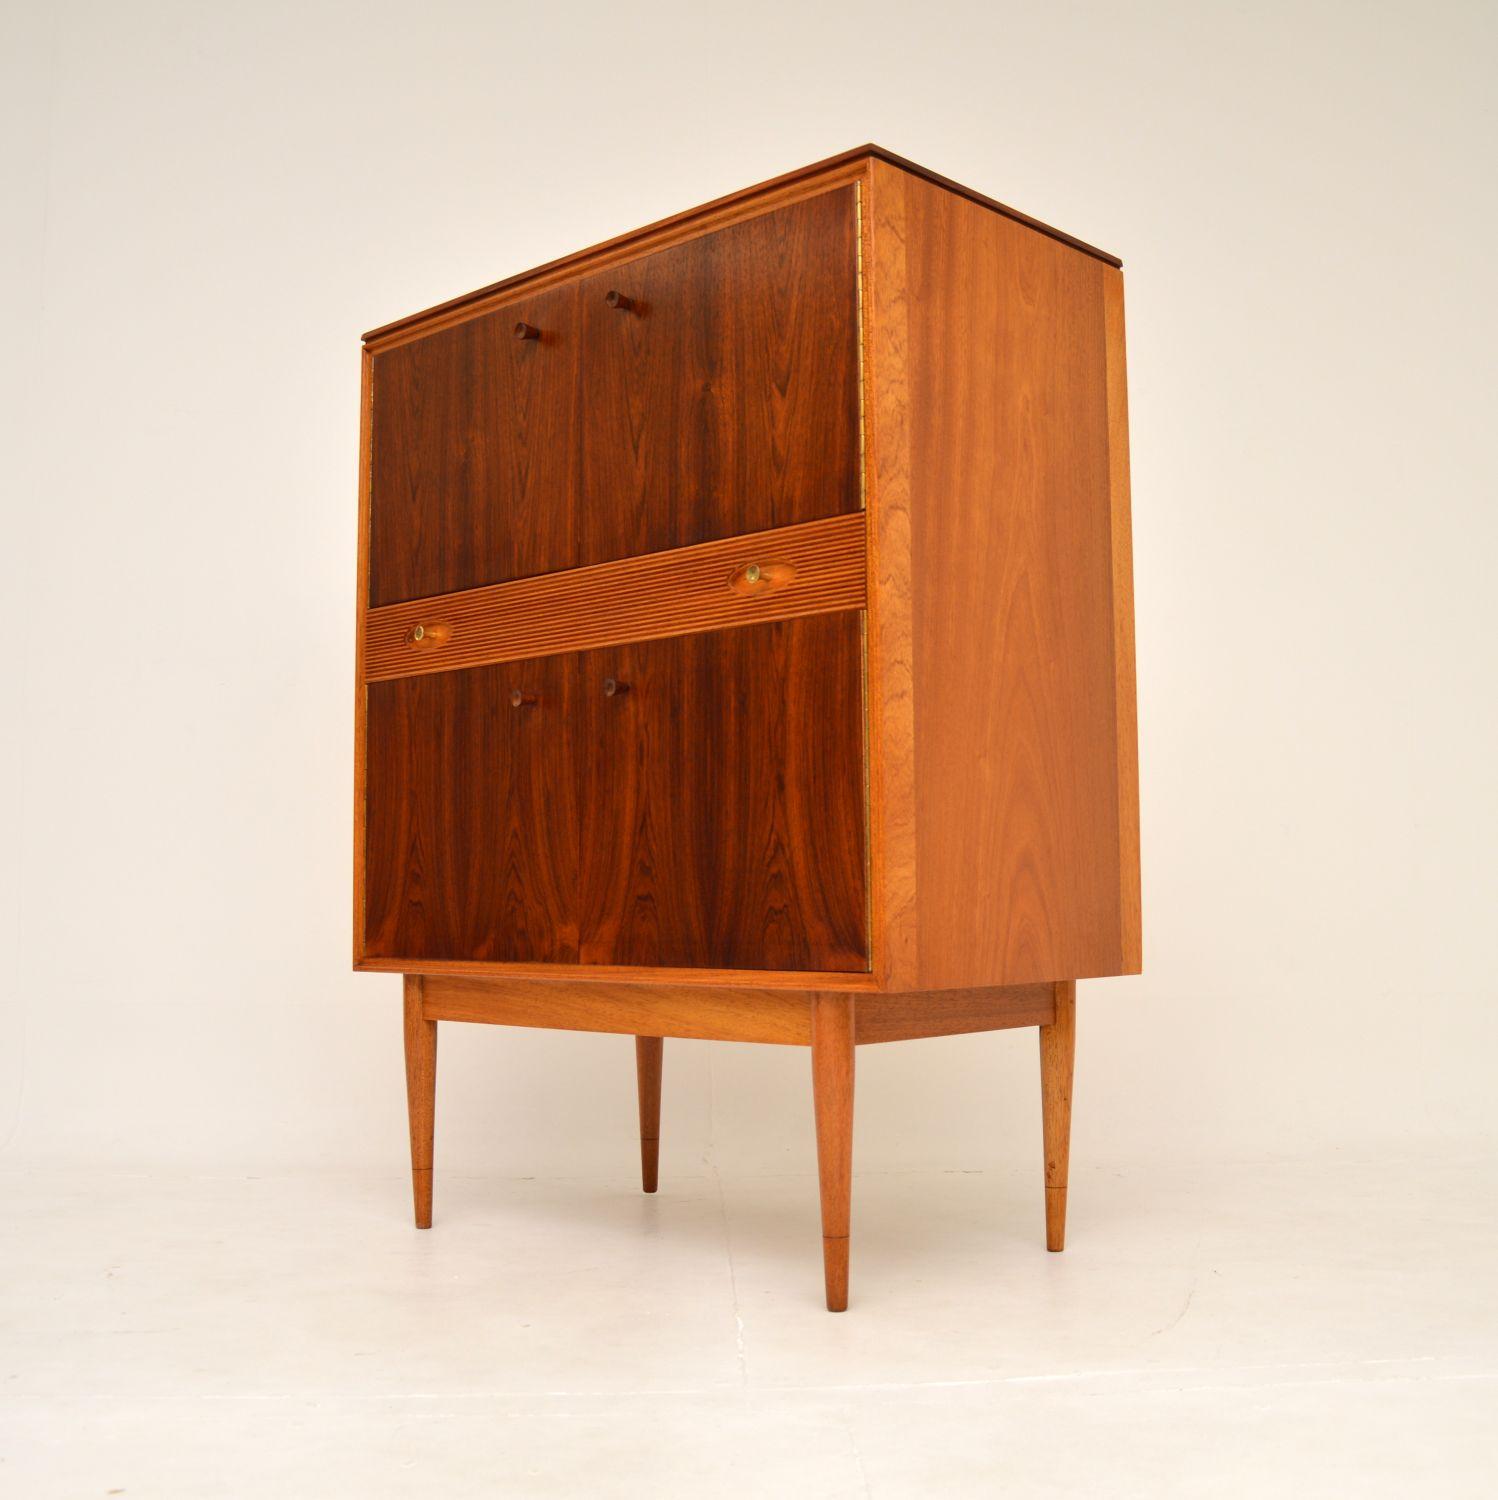 British Vintage Drinks Cabinet by Robert Heritage for Archie Shine